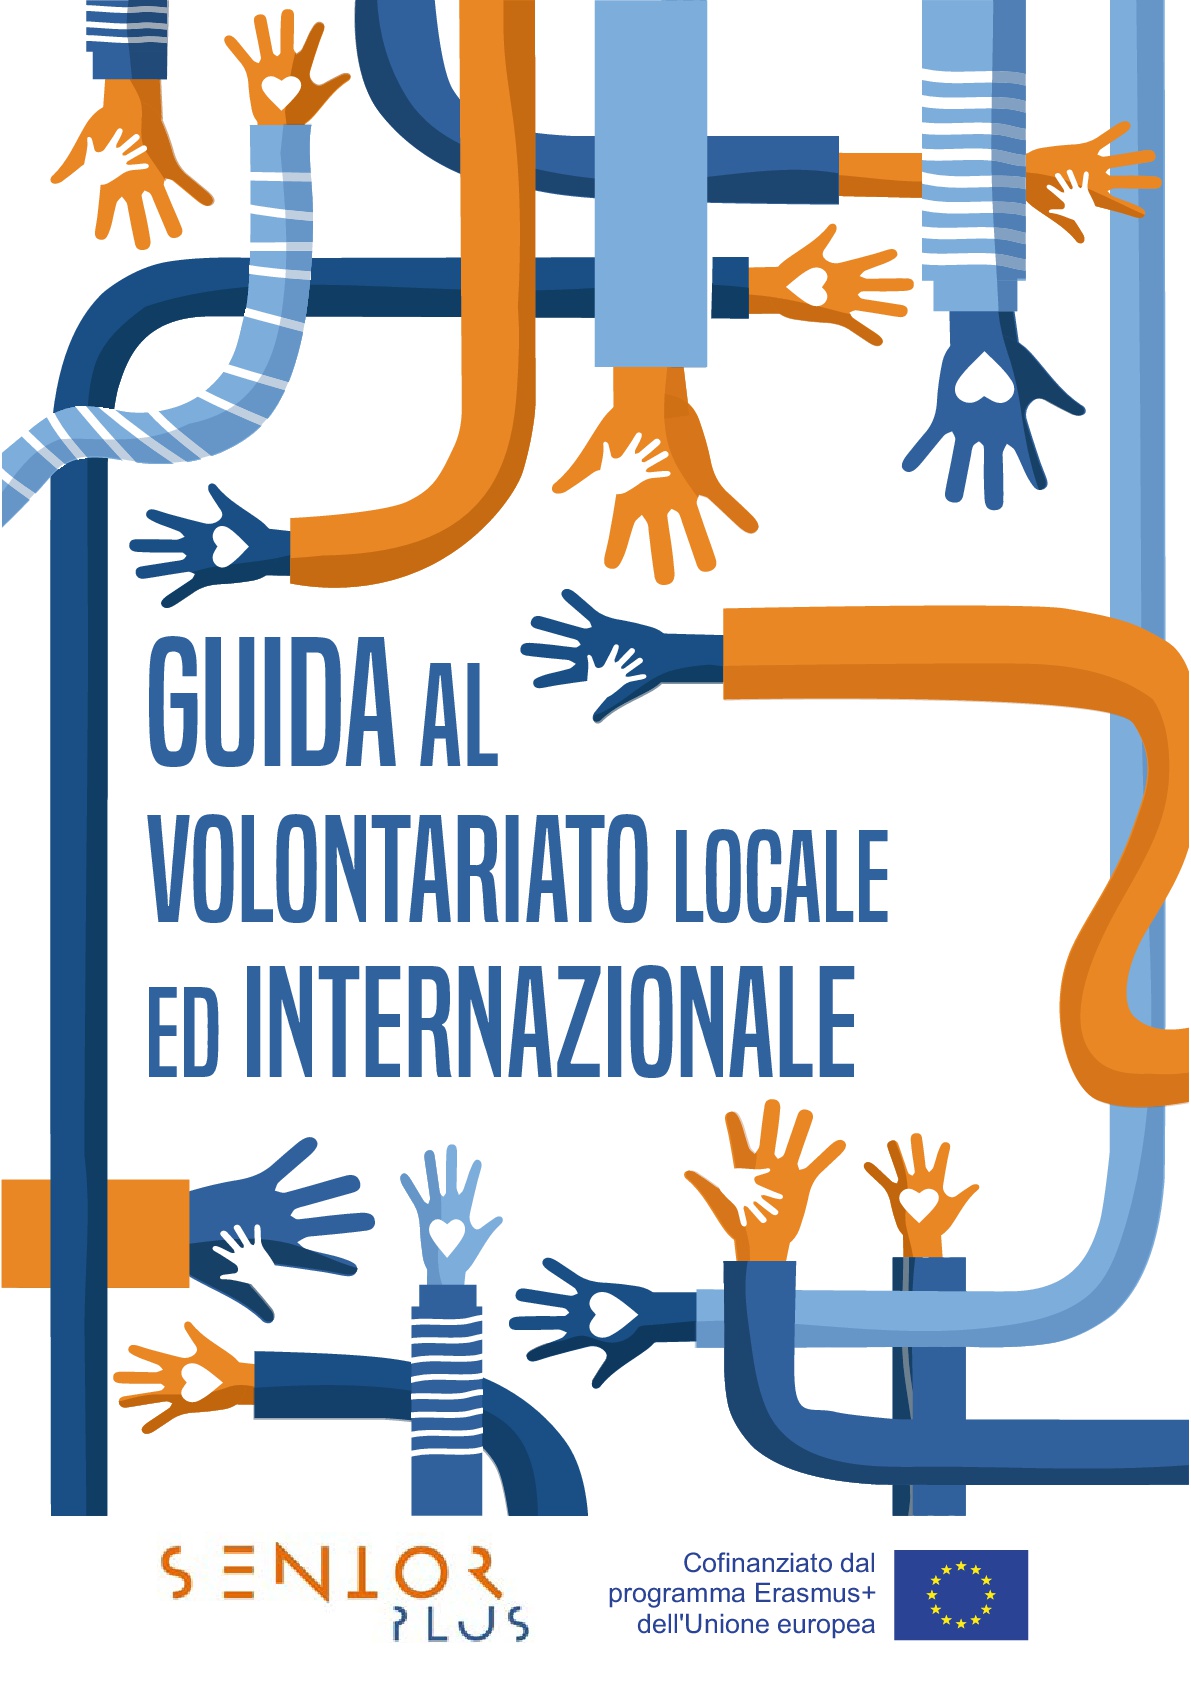 (IT) Guide on International and Local Voluntary Work